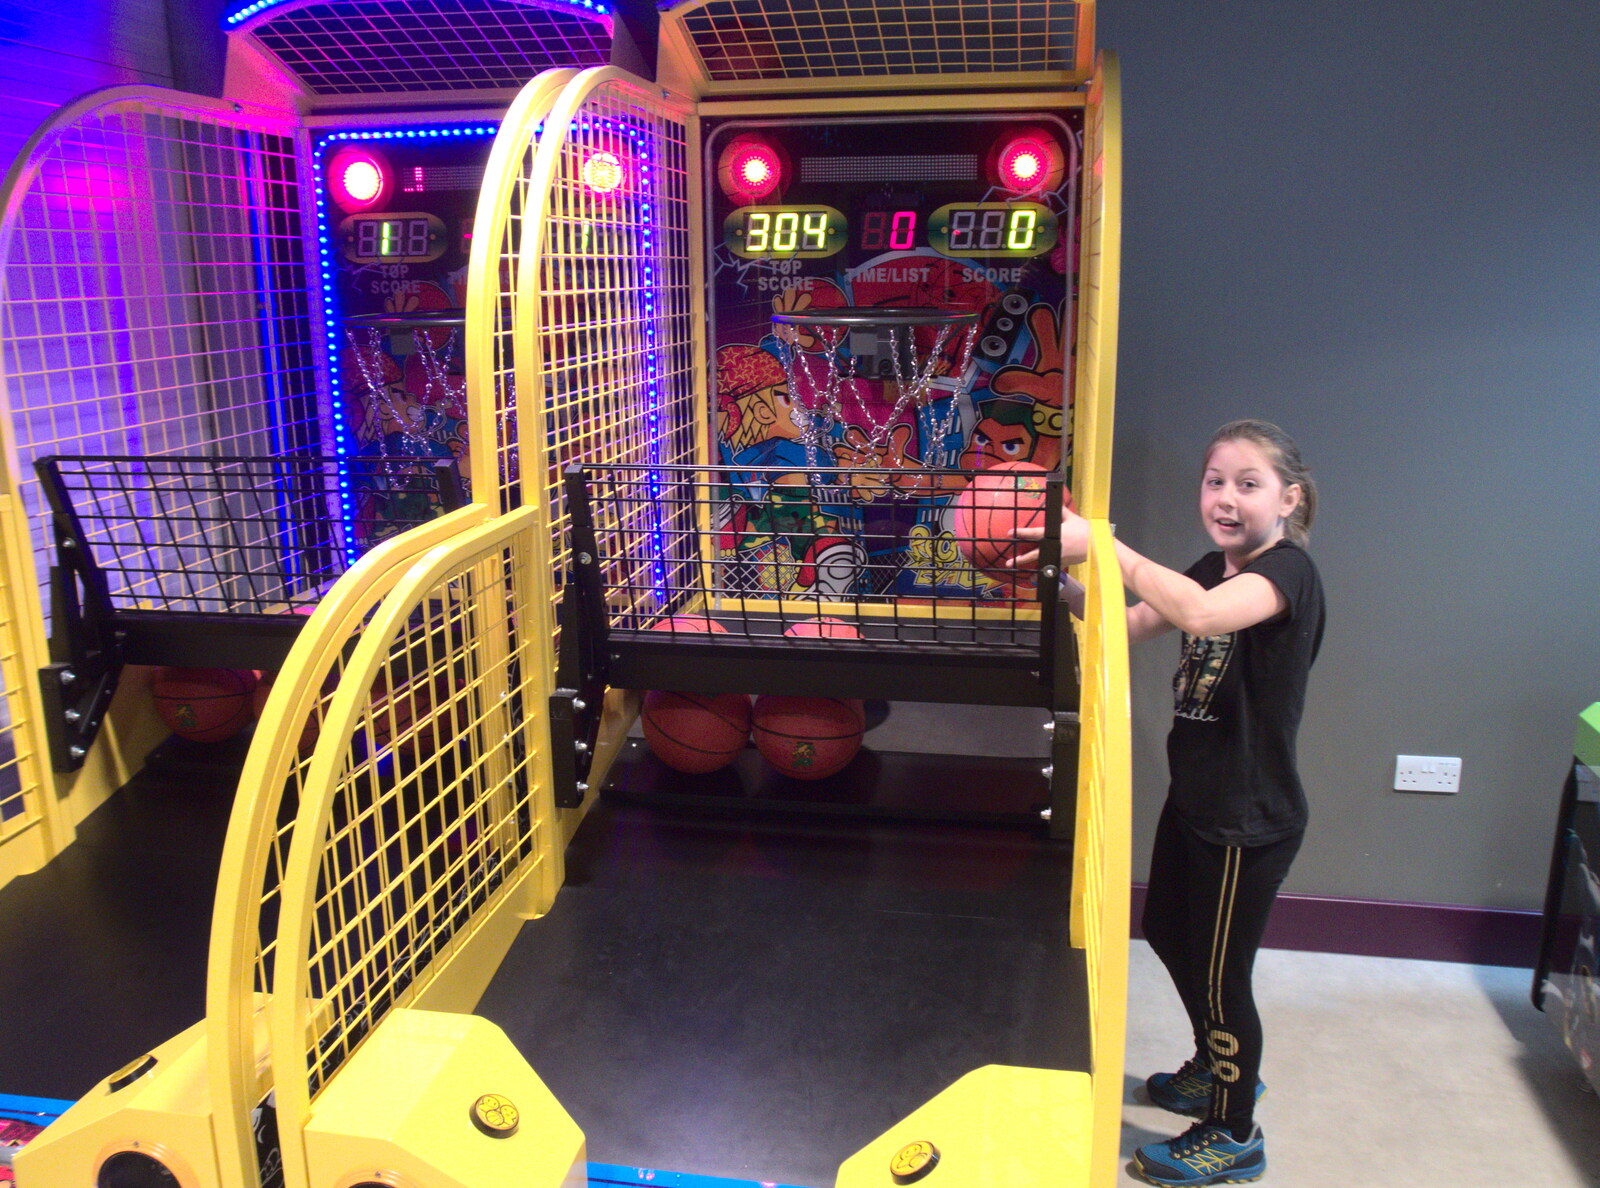 Sophie fishes basketballs out from Clip and Climb, The Havens, Ipswich - 15th February 2020